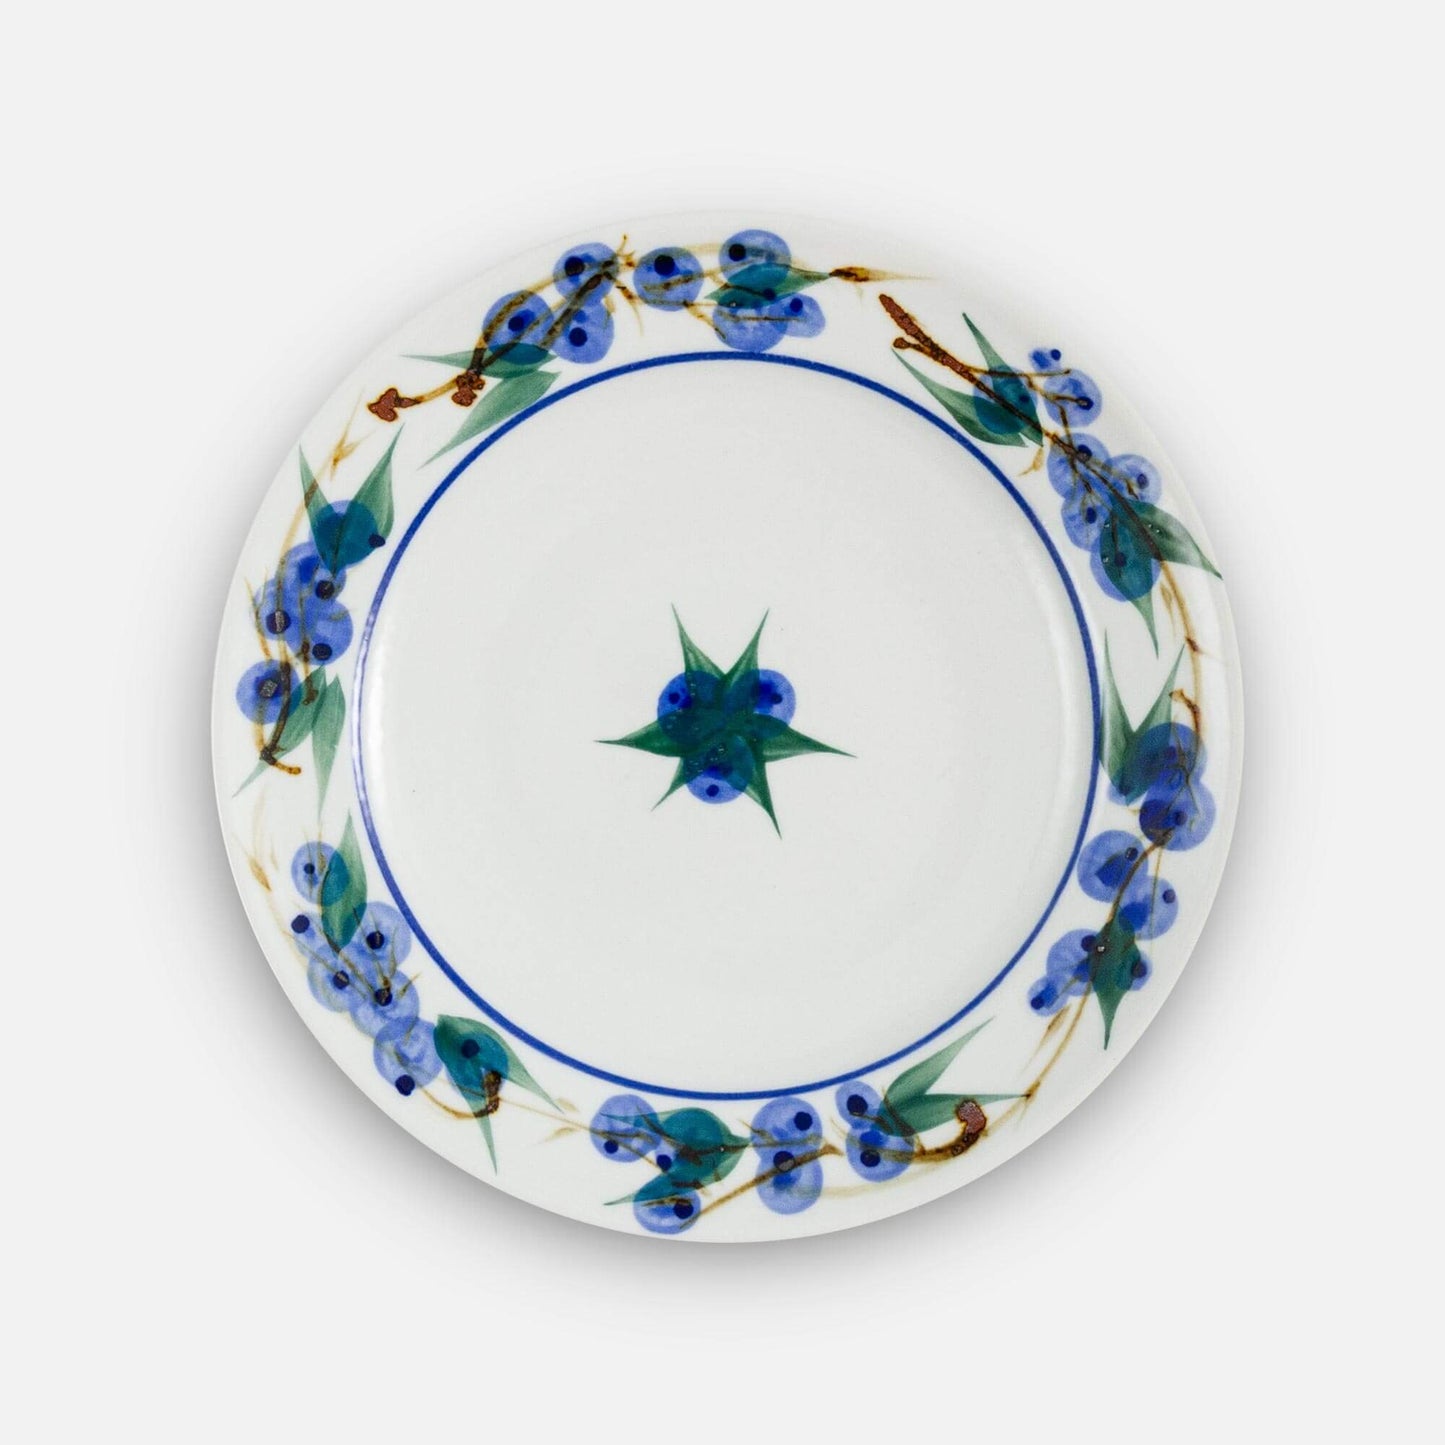 Handmade Pottery Classic Dinner Plate in Blueberry pattern made by Georgetown Pottery in Maine